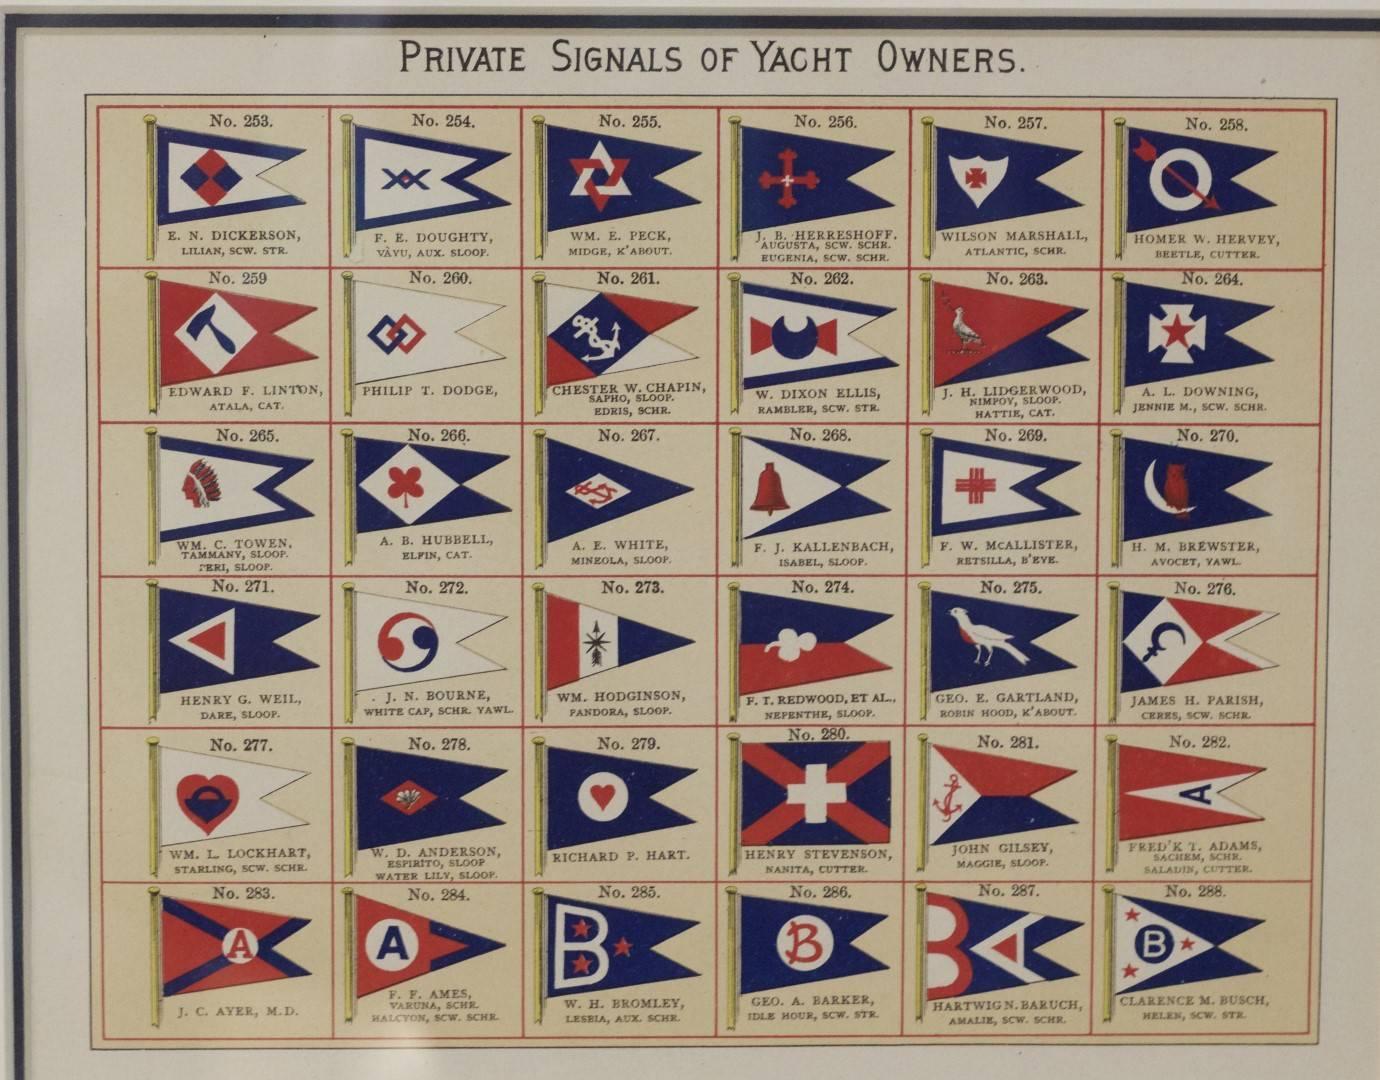 A framed original page from Lloyd's Register, 1938. Showing the private signals of yacht owners. Numbers 253-288. Including JB Herreshoff and Clarence Busch. Matted and framed. Dimensions: 12.5